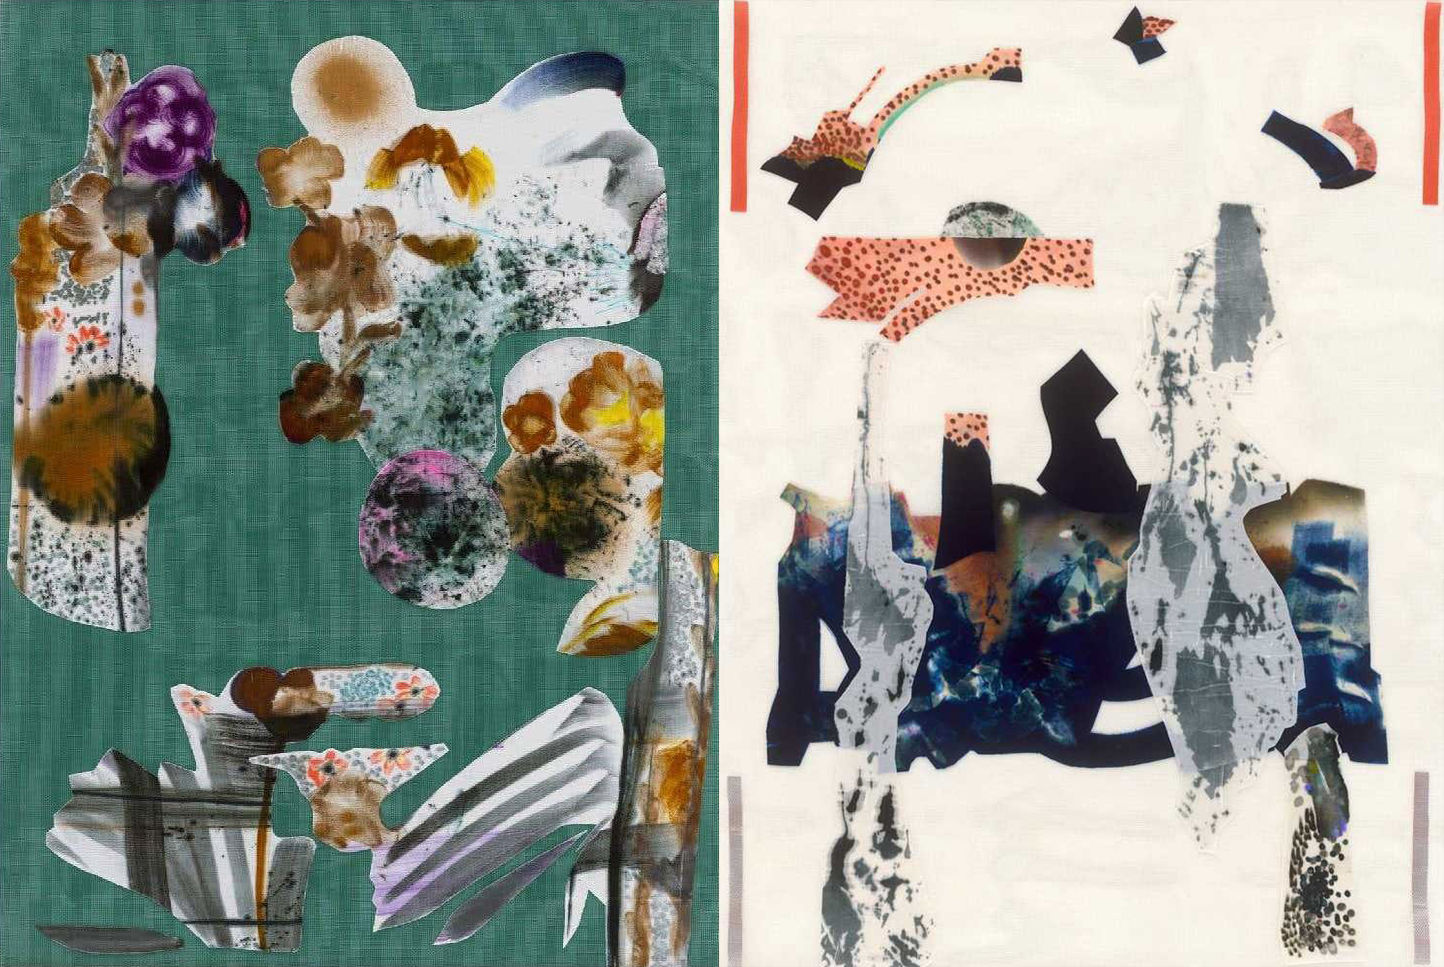 Two abstract collages by Travis Boyer.